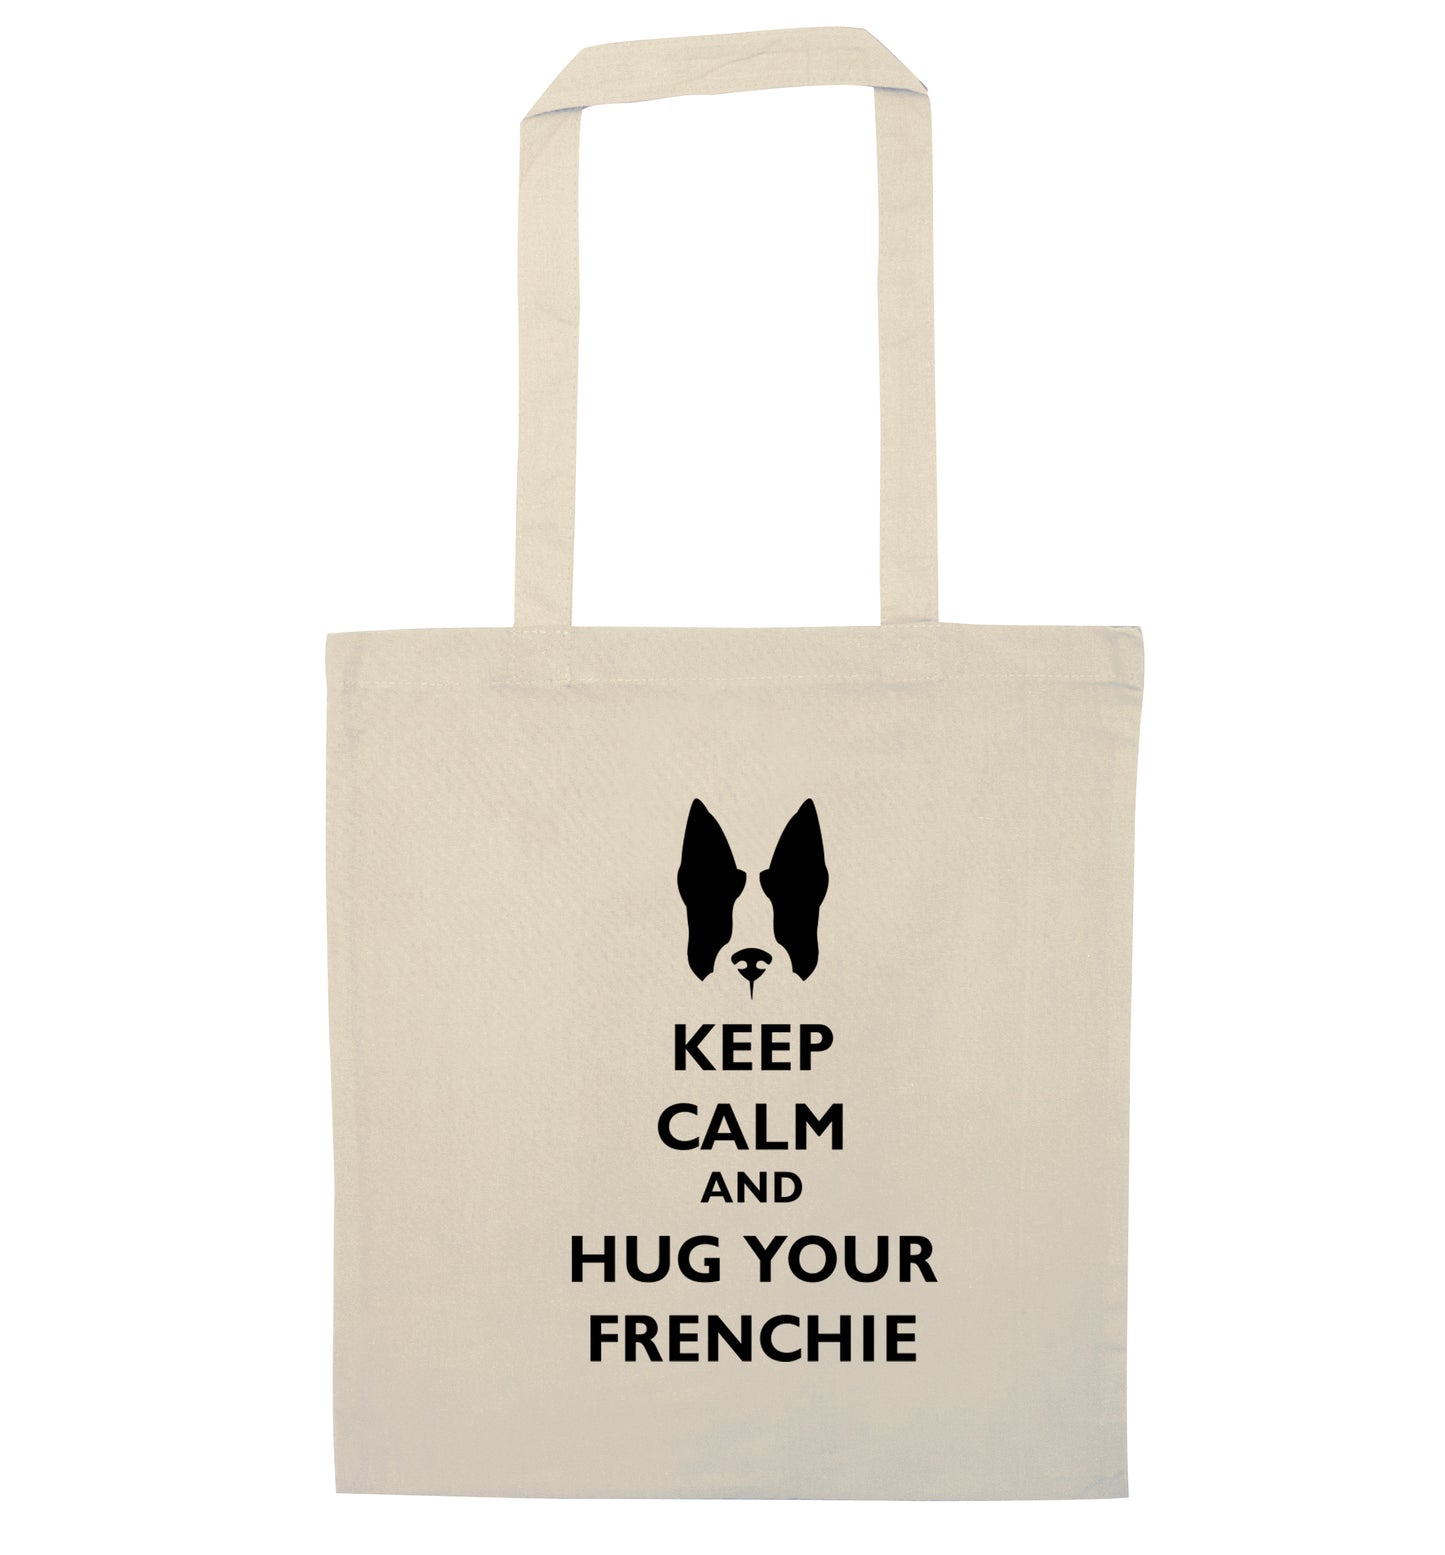 Keep calm and hug your frenchie natural tote bag